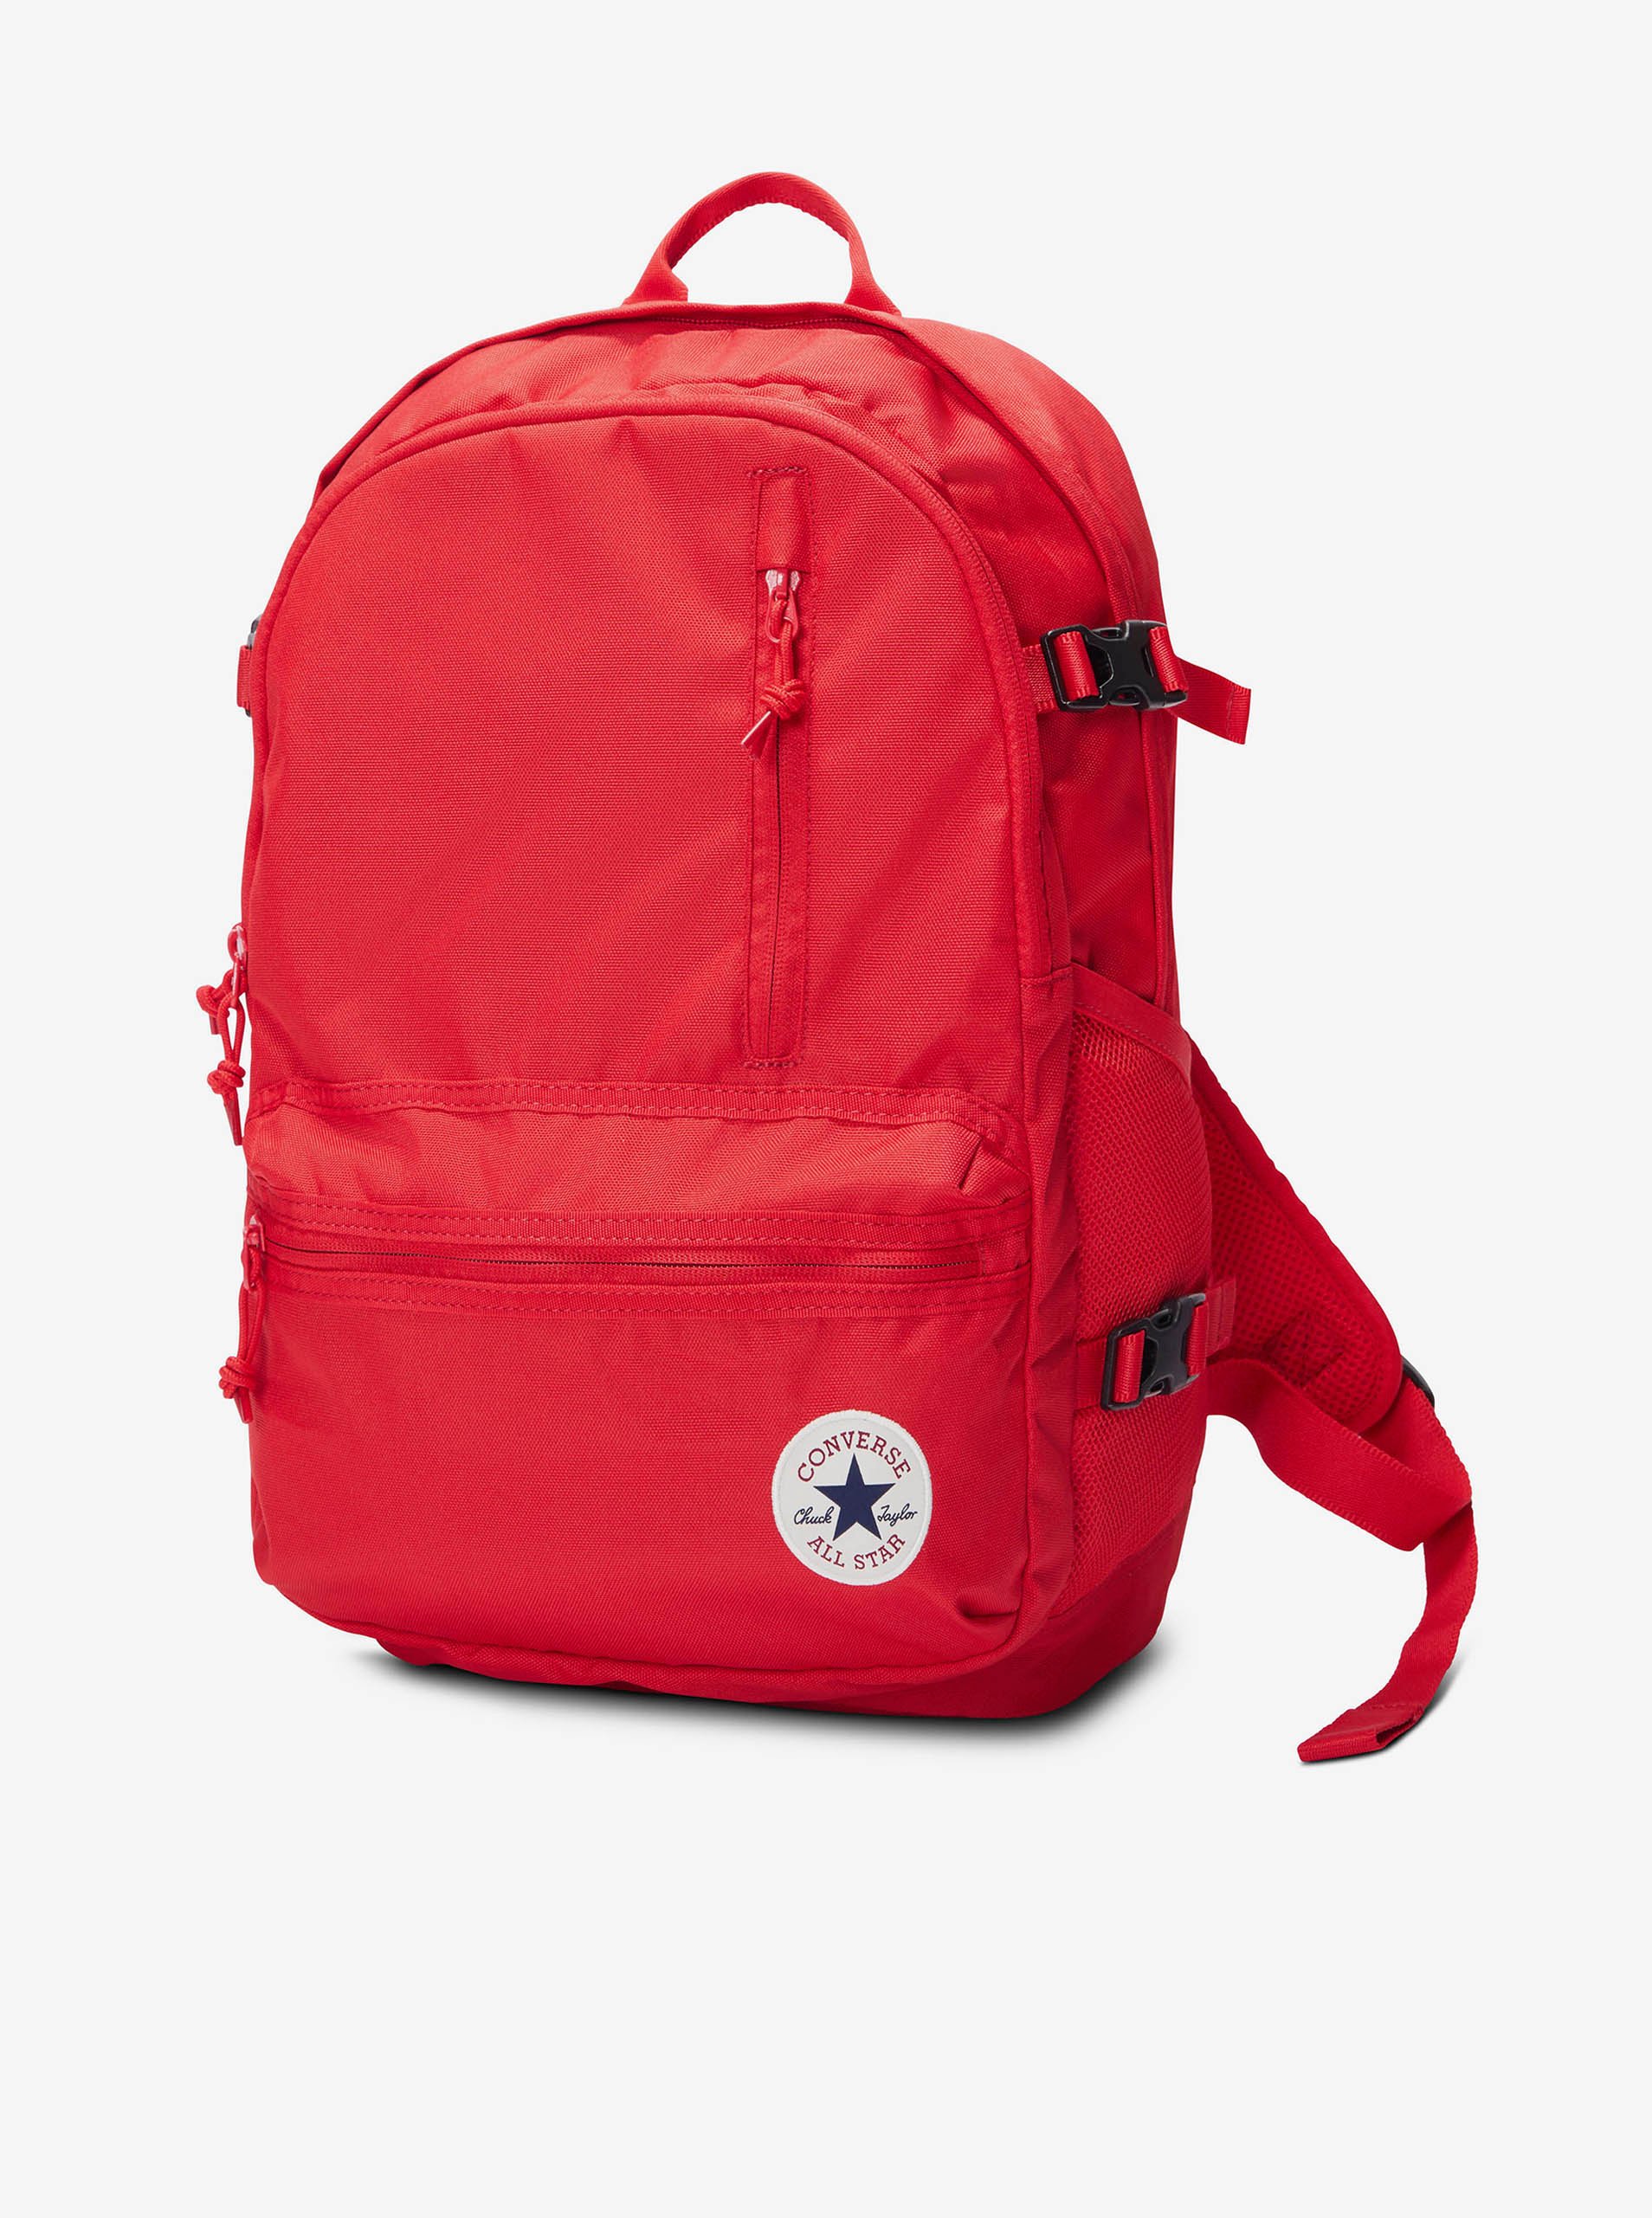 Red Unisex Backpack Converse Straight Edge Backpack - Unisex